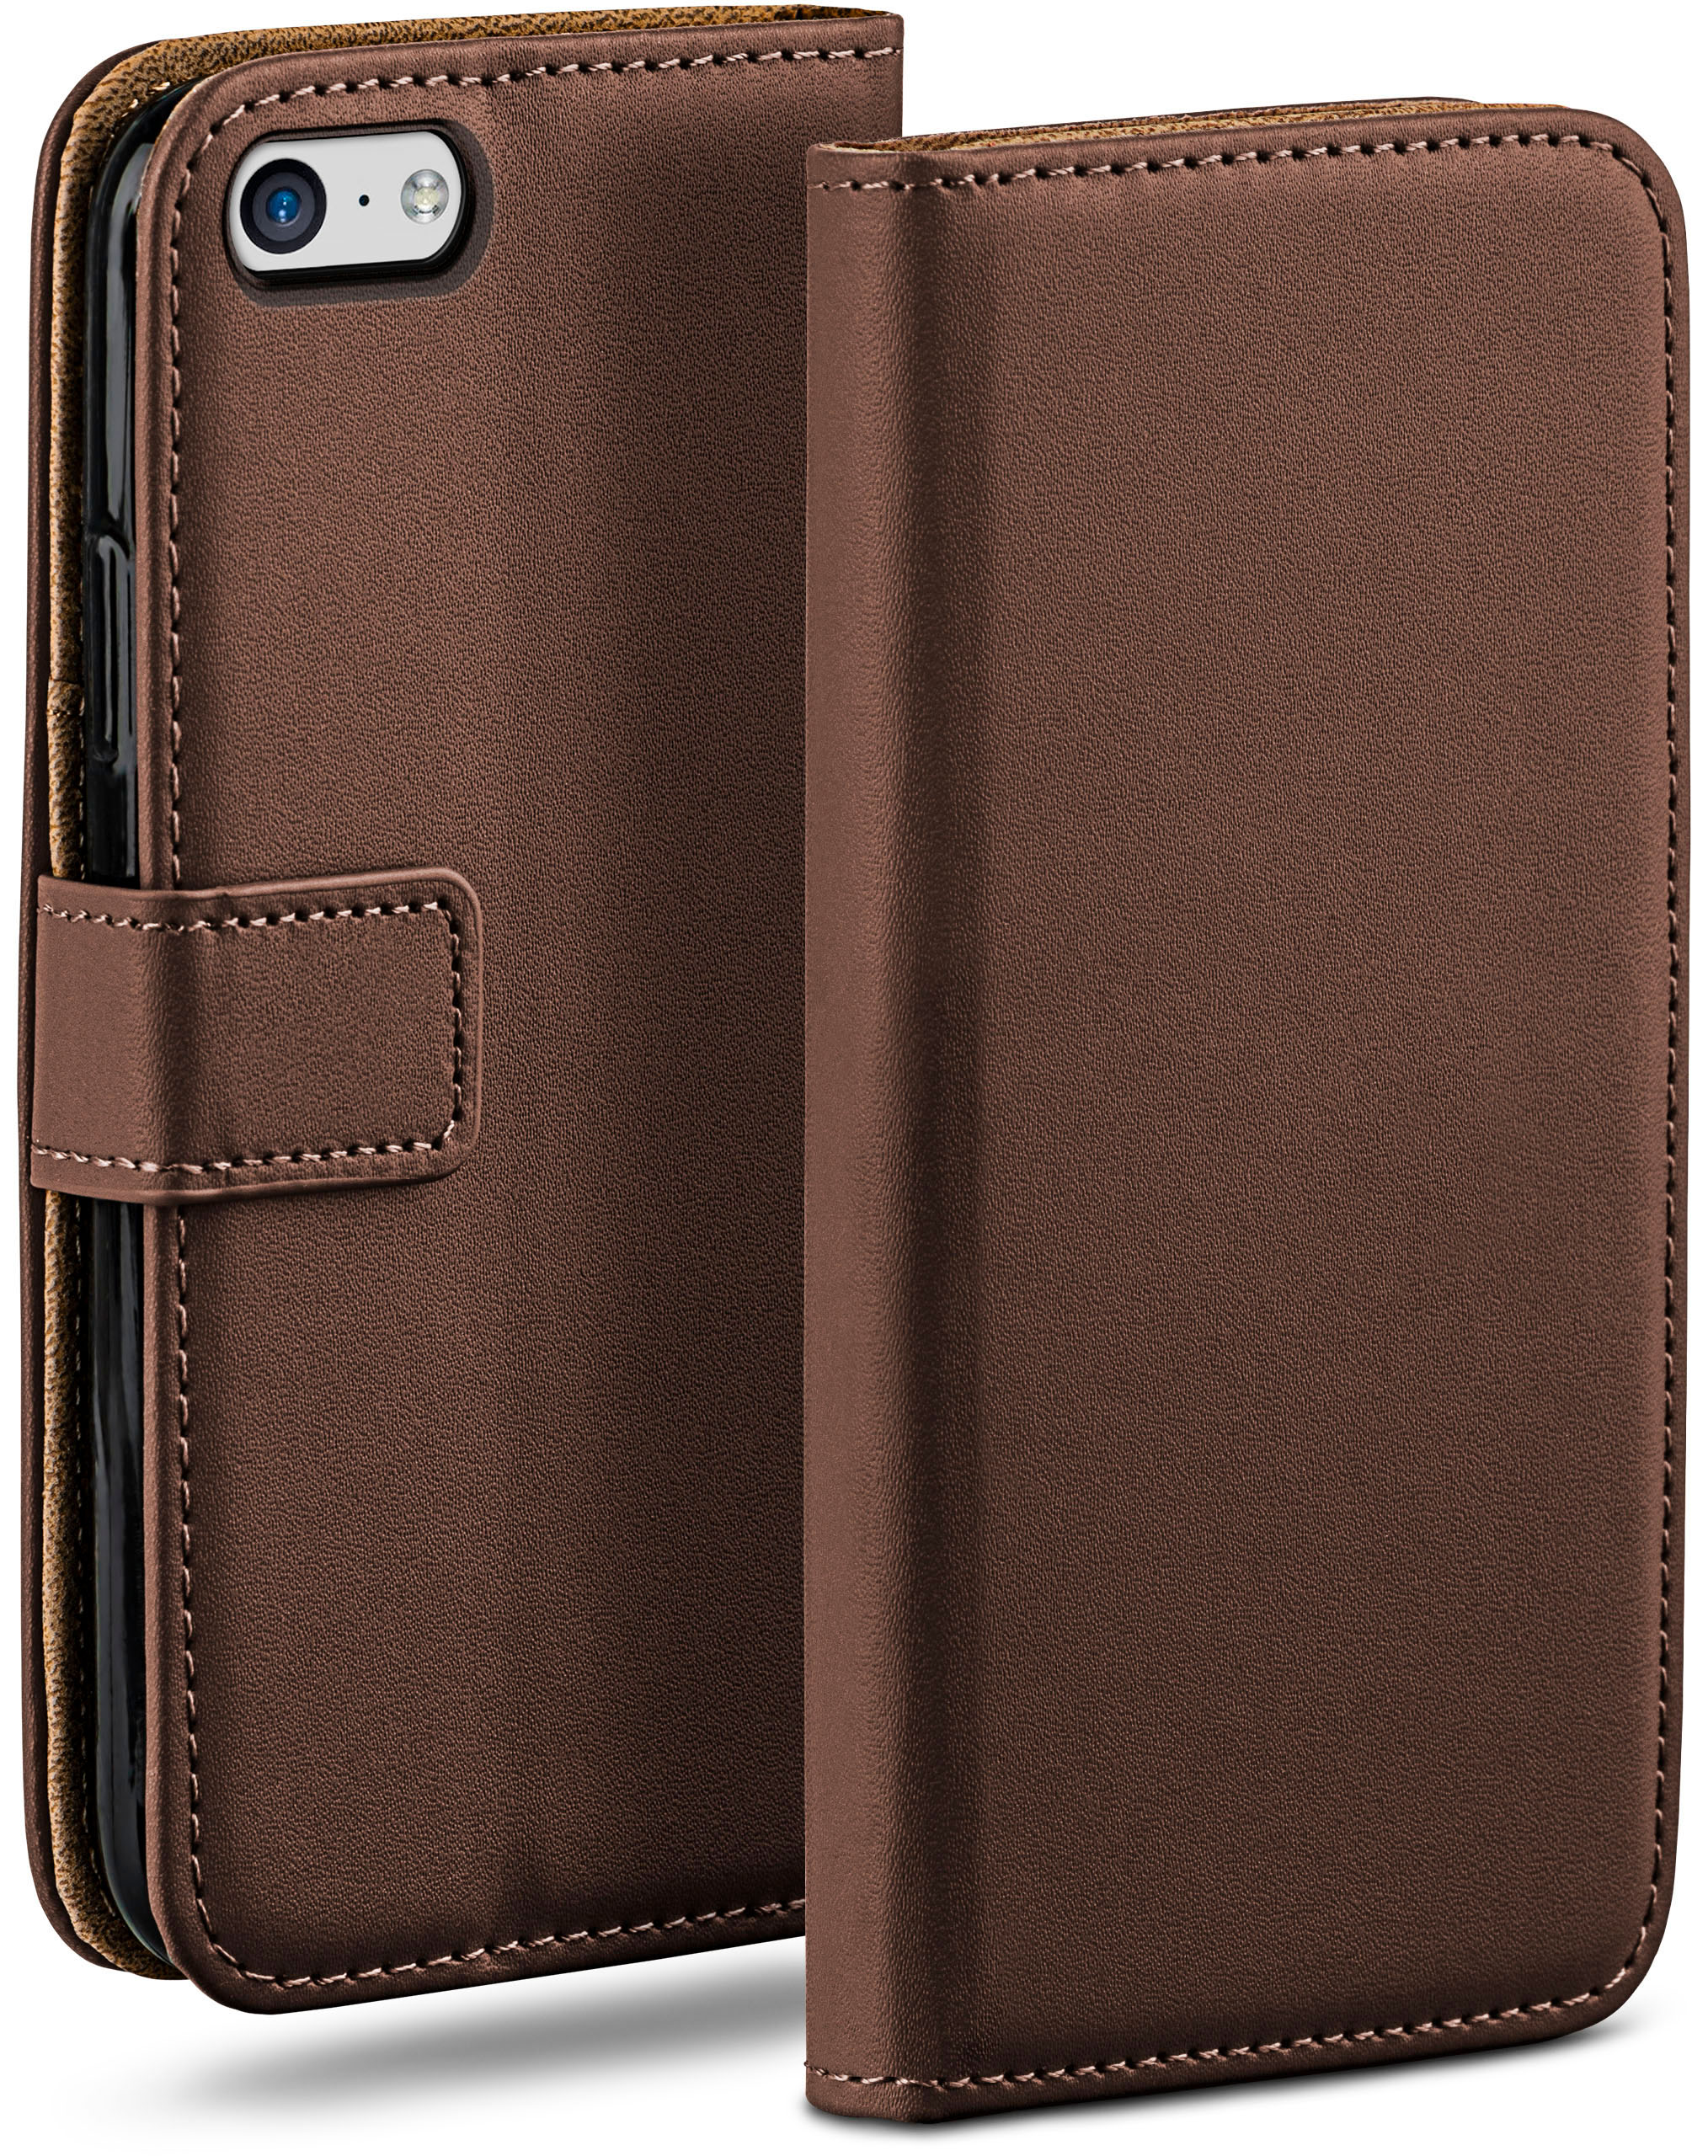 MOEX Book Case, Bookcover, iPhone 5c, Apple, Oxide-Brown